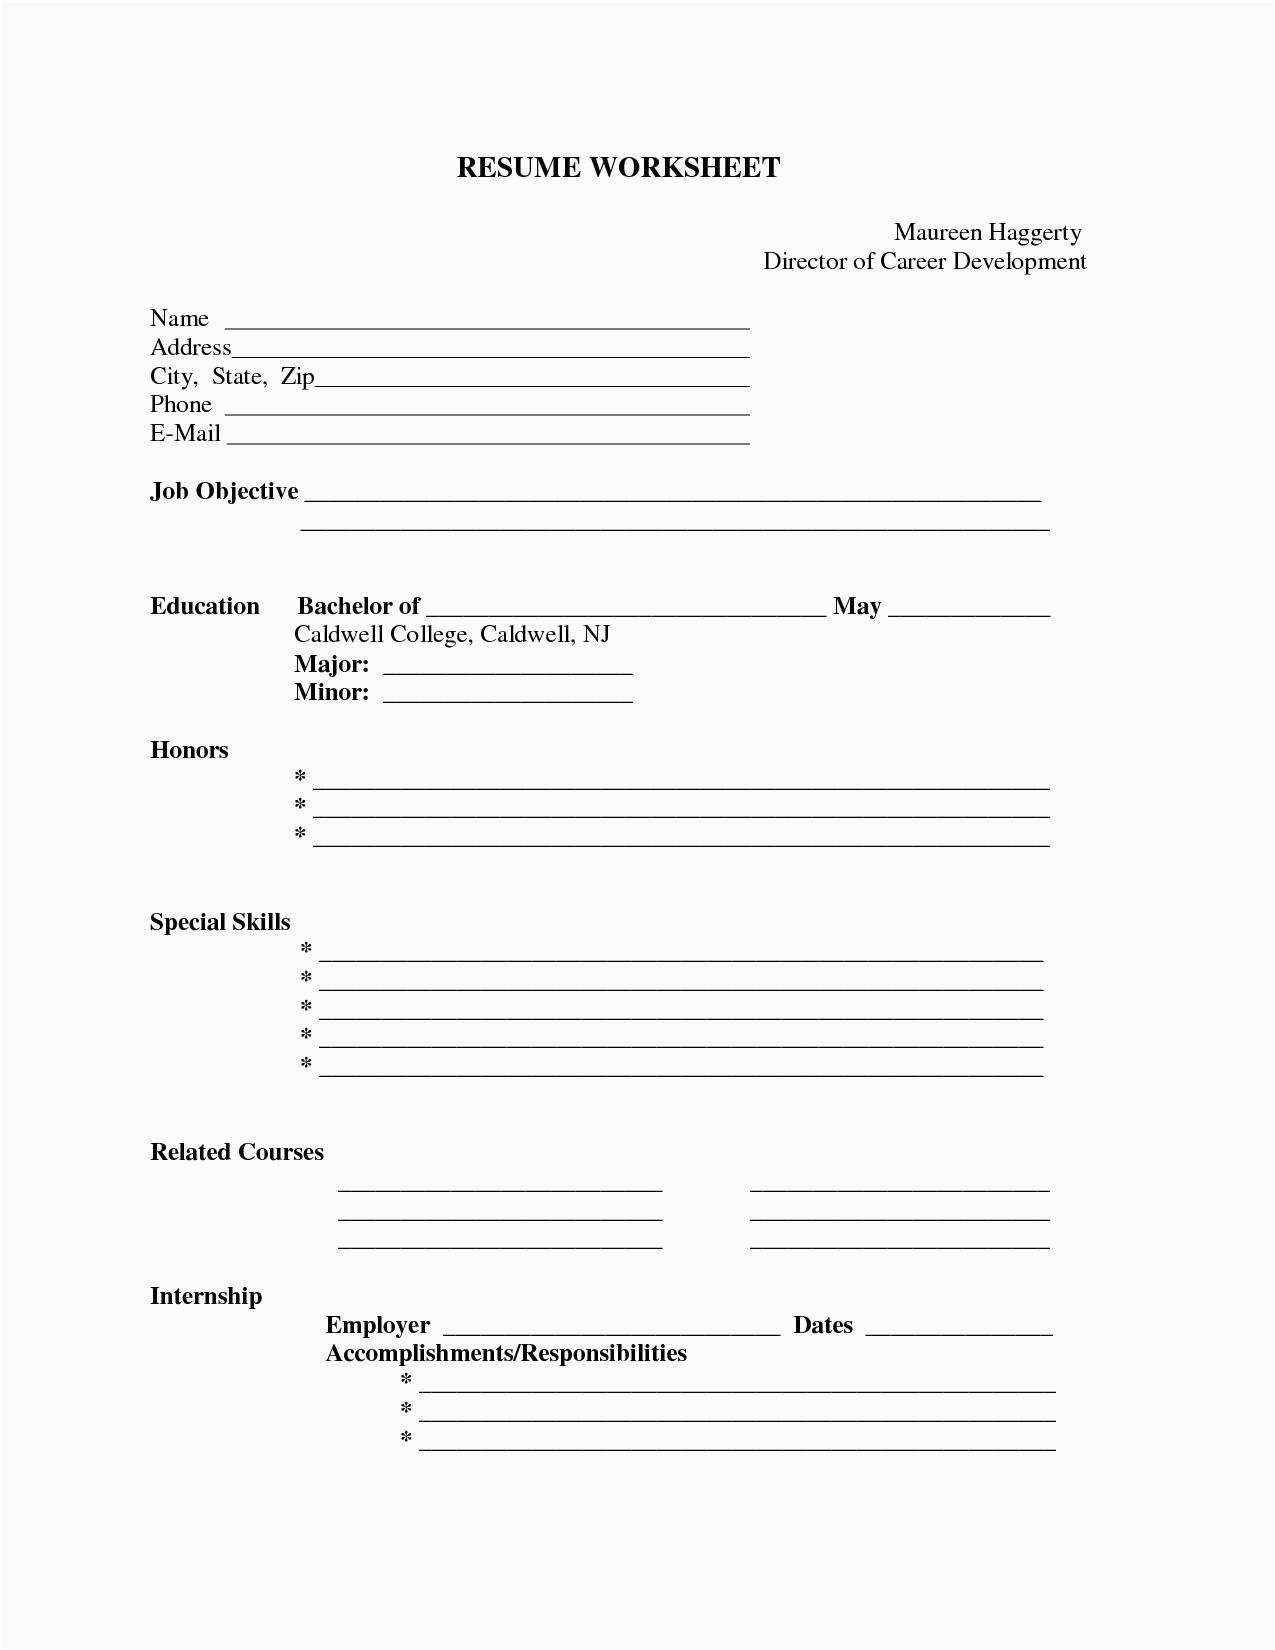 Blank Resume Templates for Free to Fill In Free Printable Fill In the Blank Resume Templates